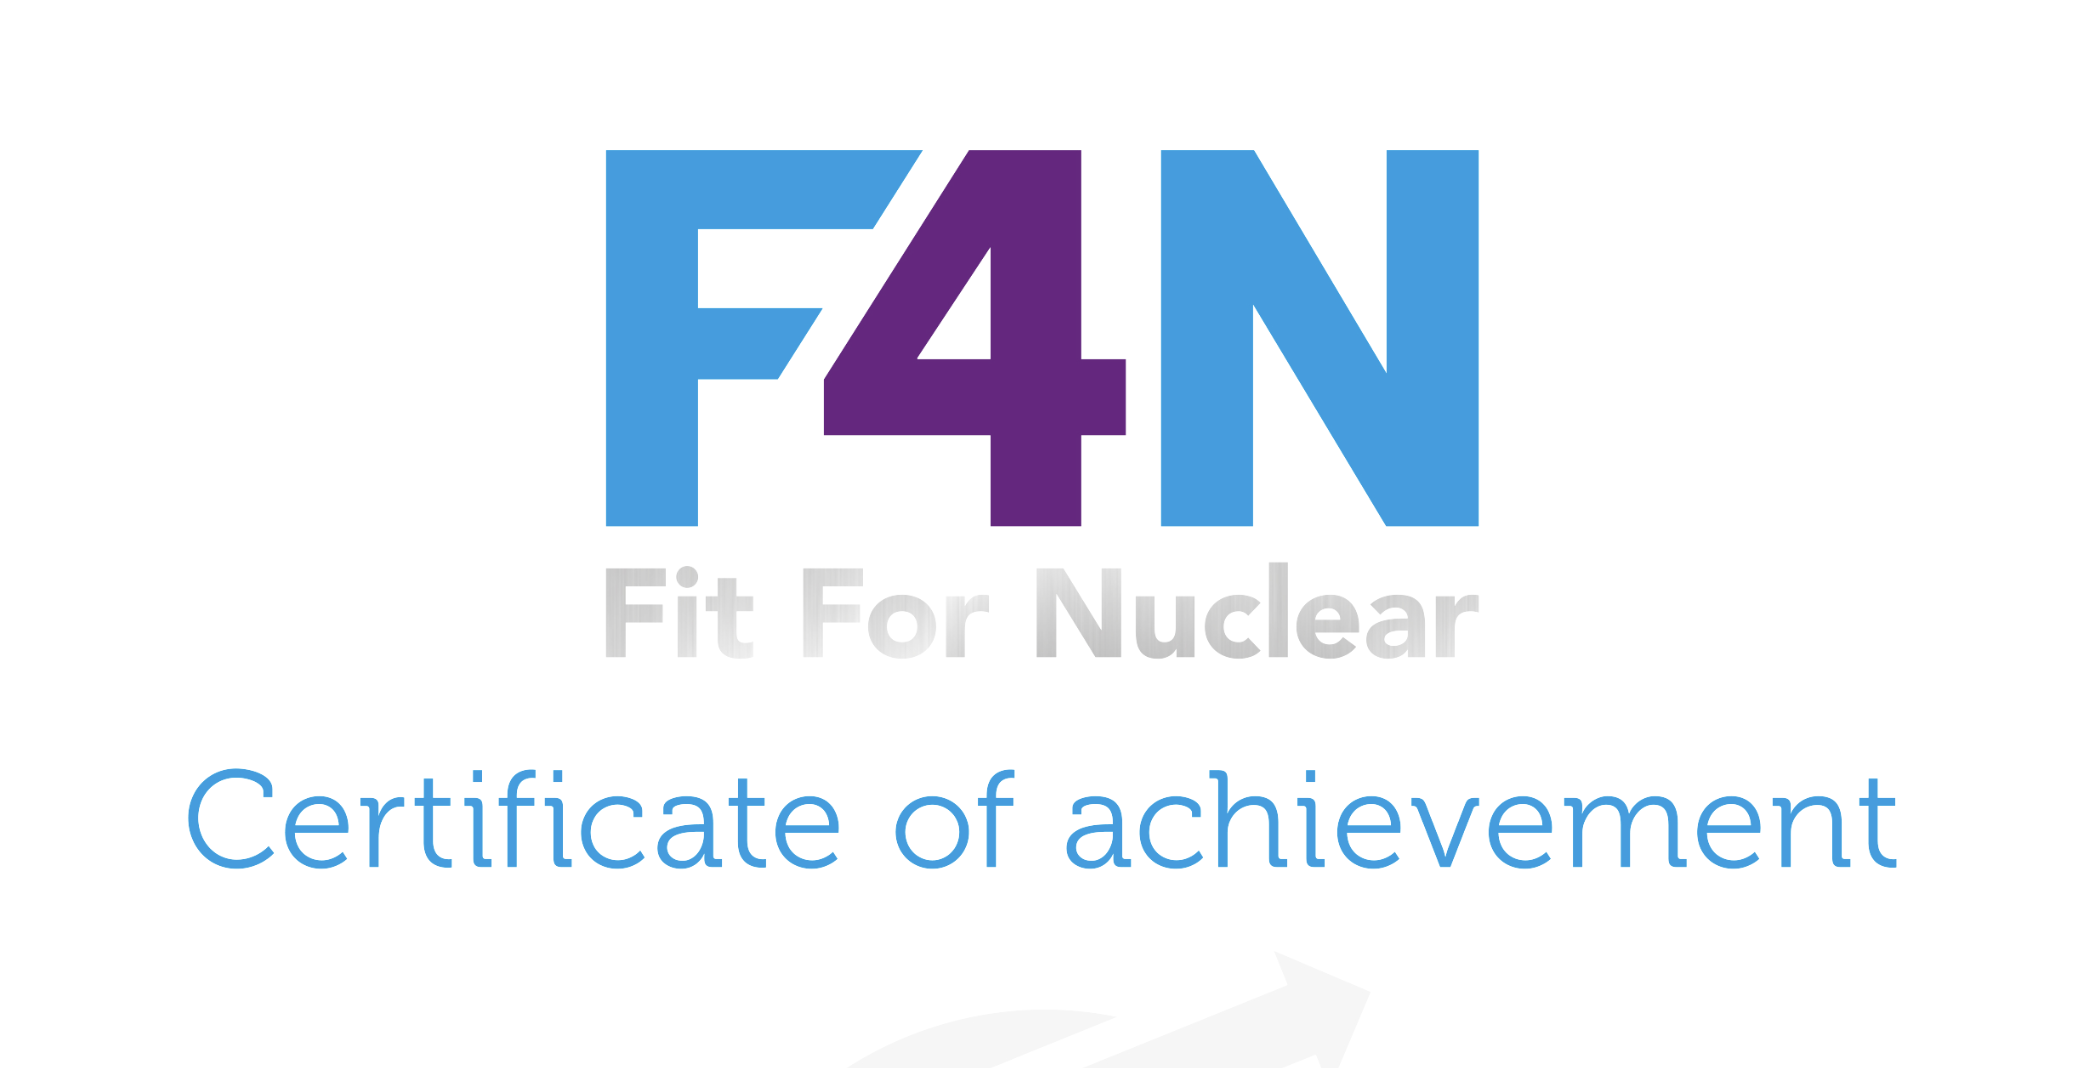 We became Fit for Nuclear certified!